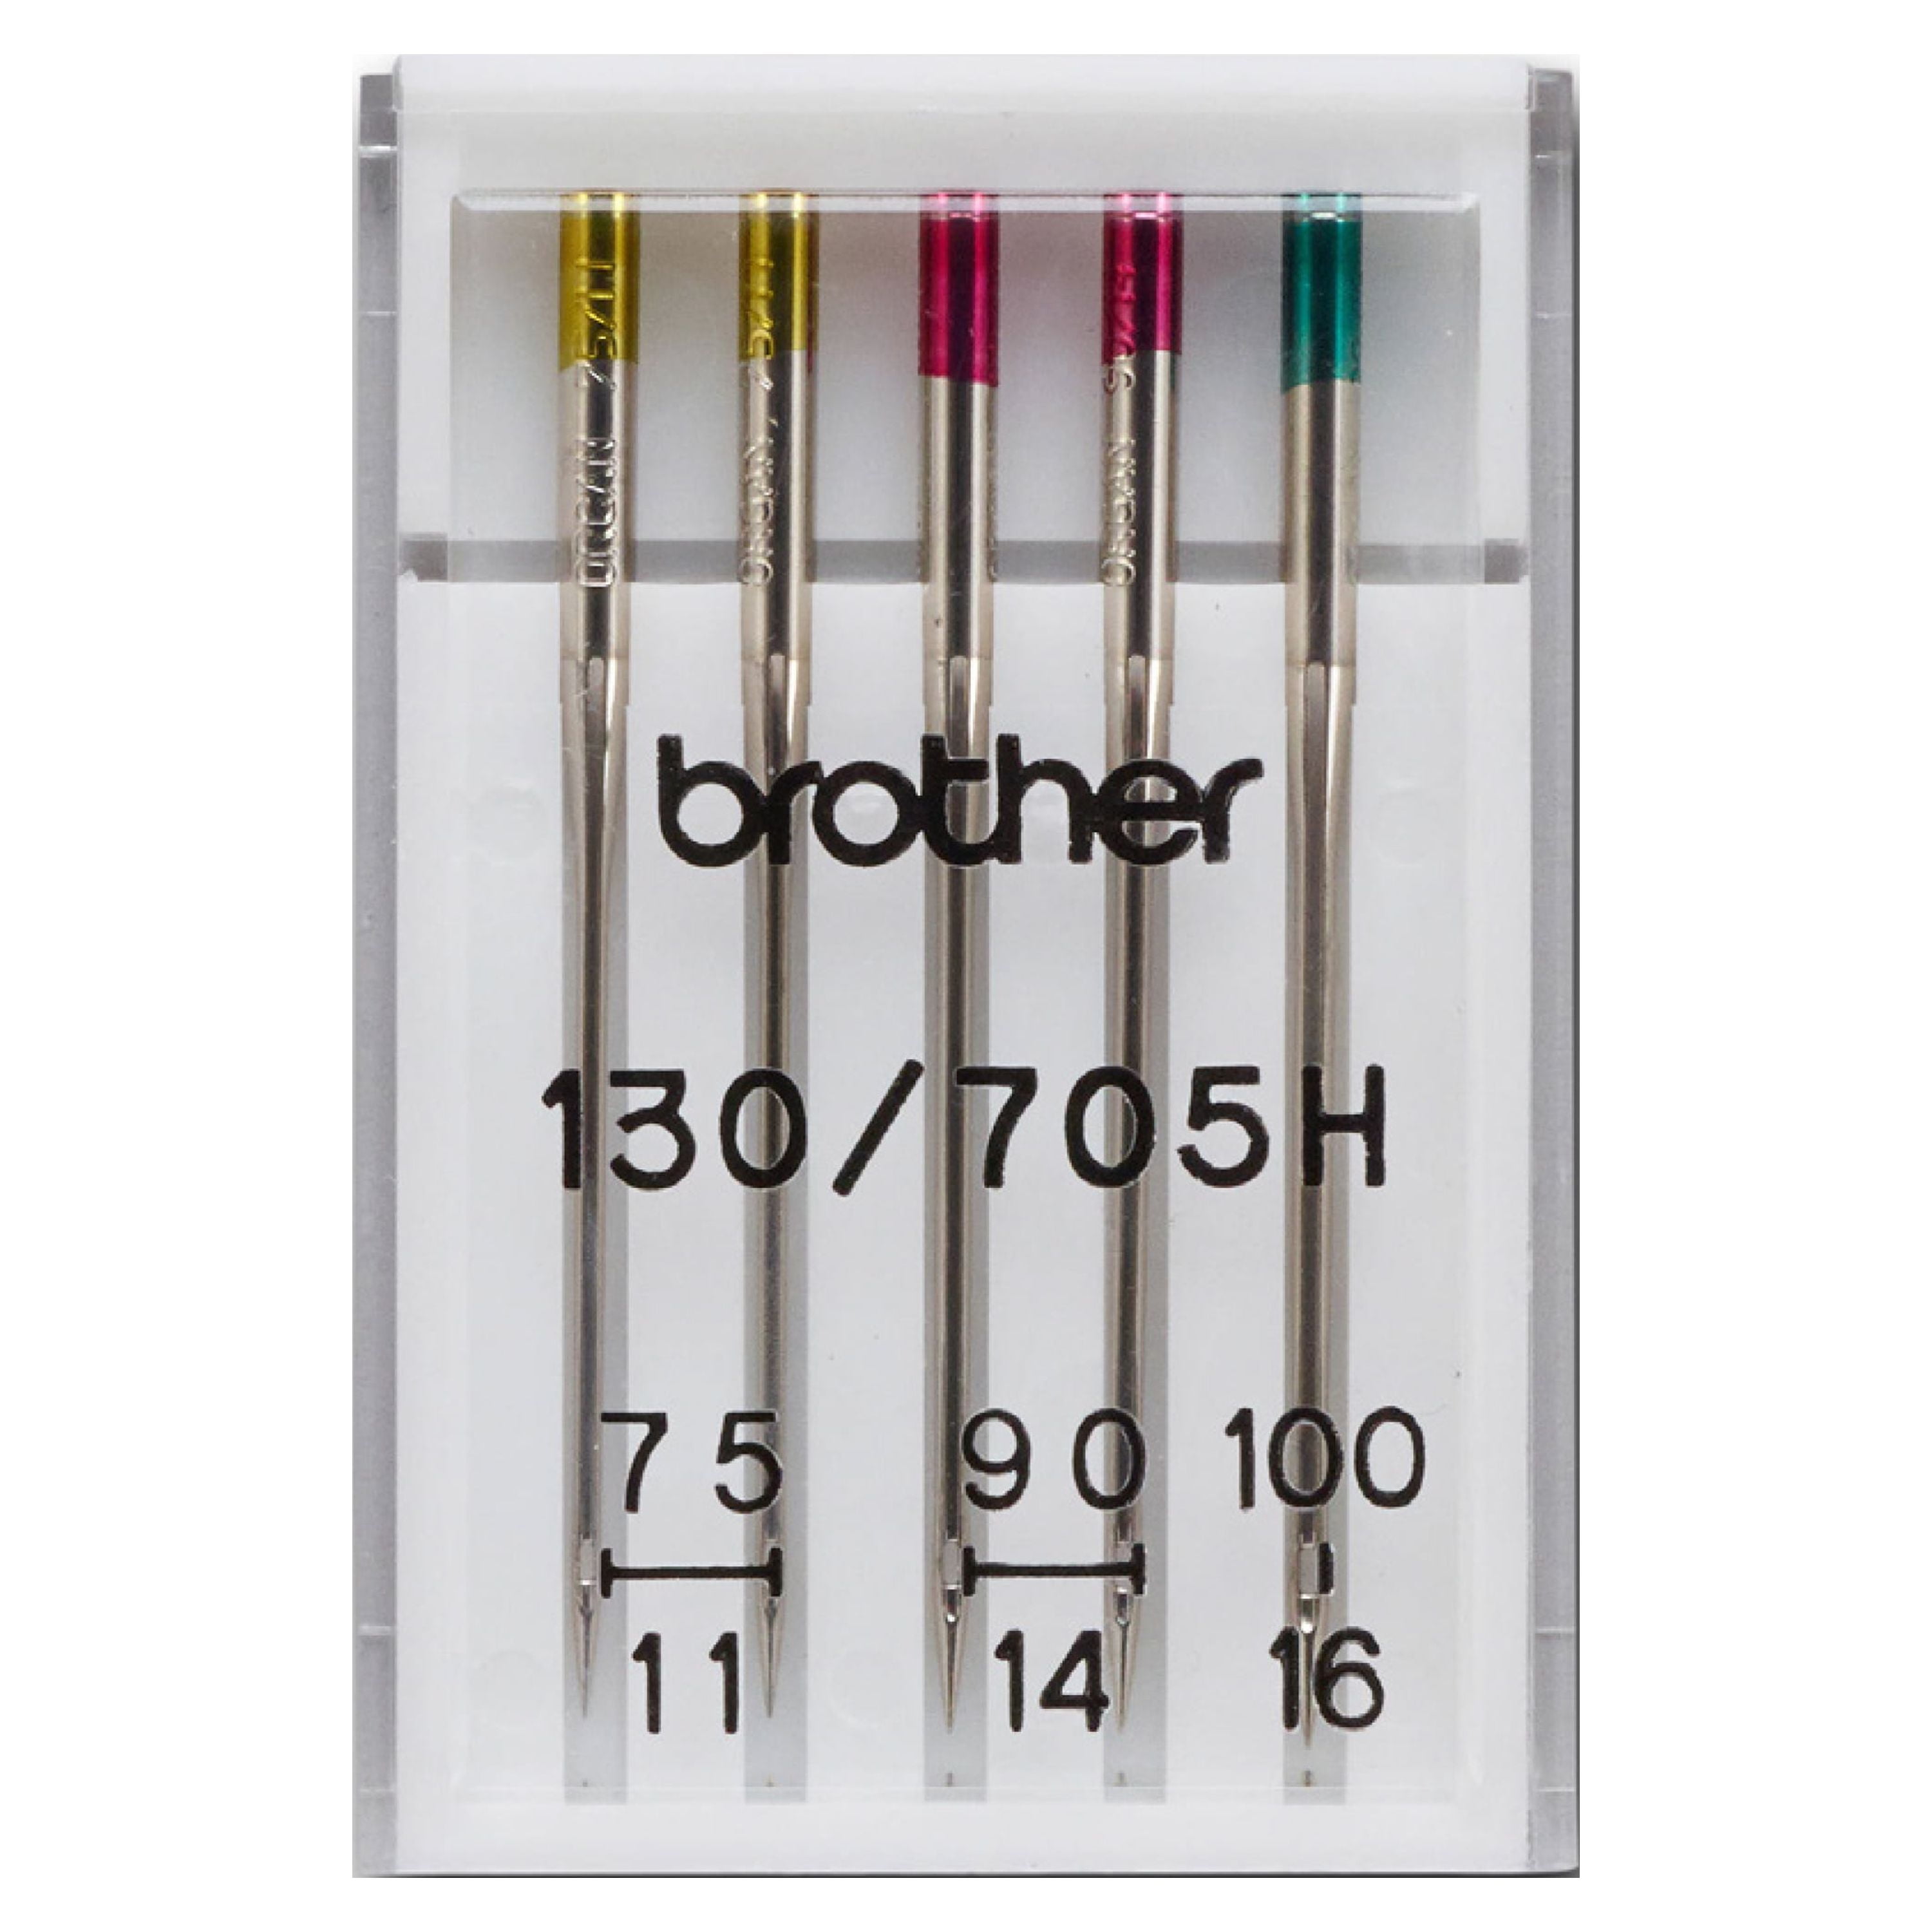 Brother Universal Sewing Machine Needles (5 Piece)